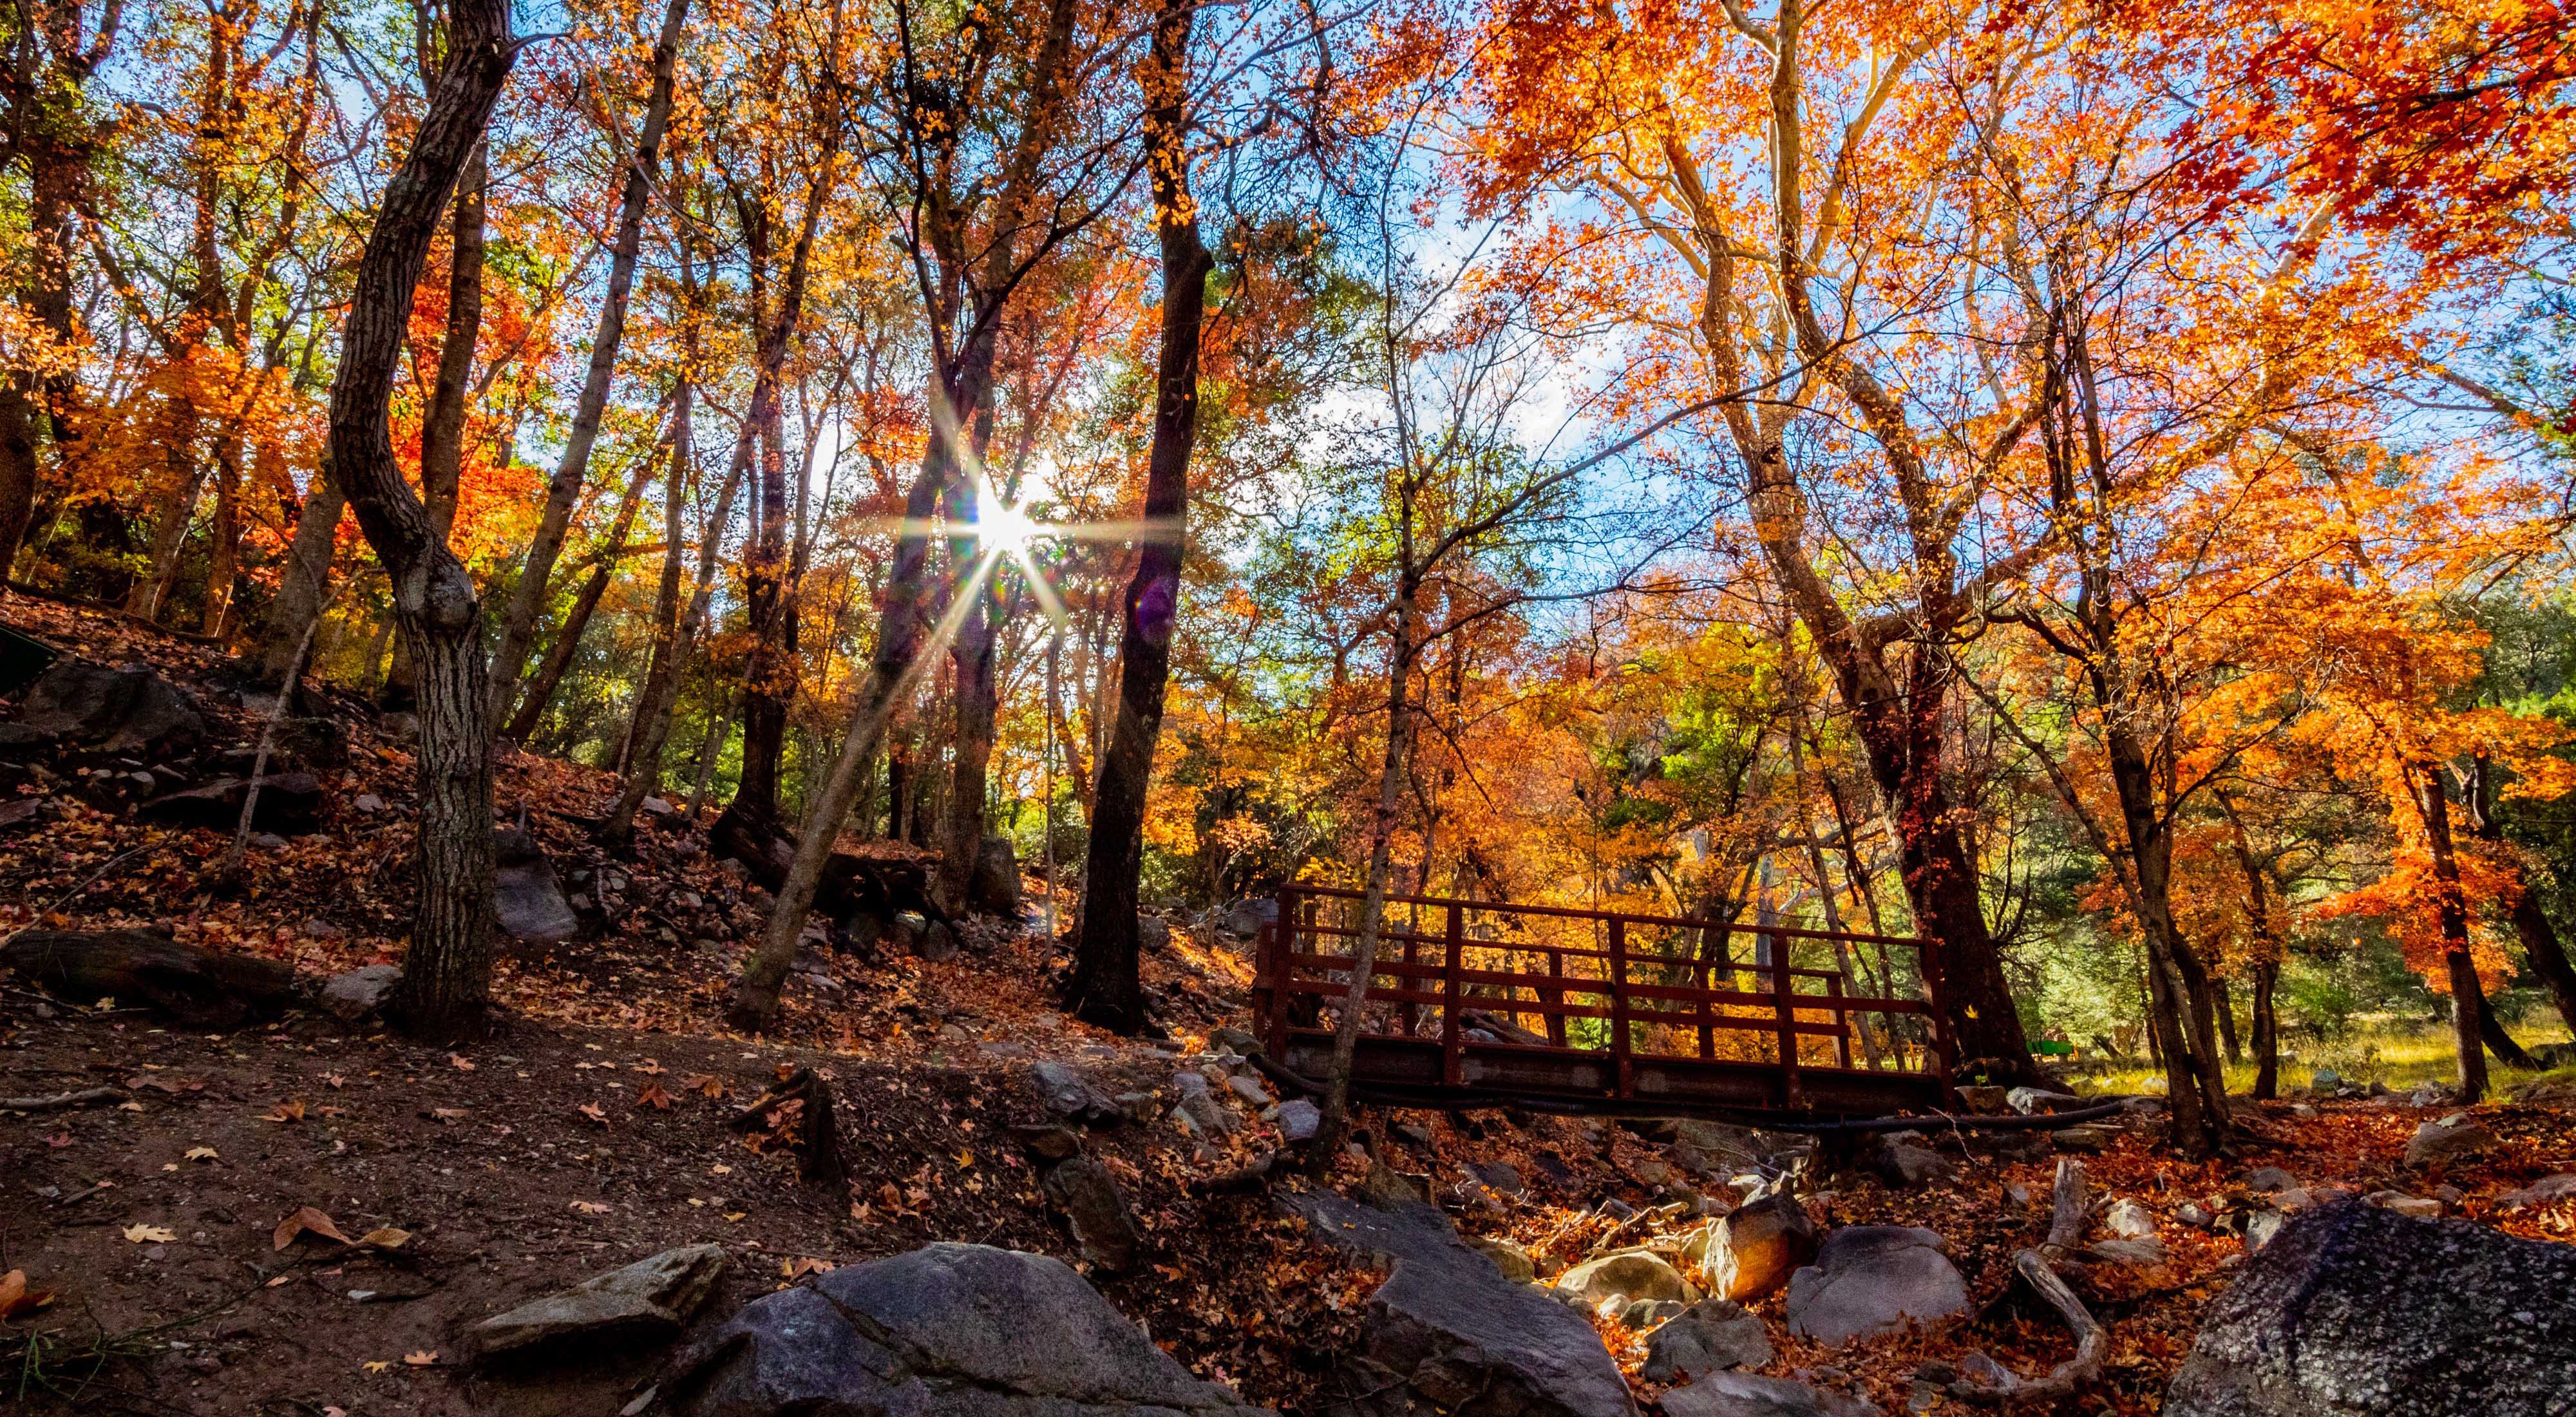 Footbridge surrounded by a forest in vivid fall colors in Ramsey Canyon.